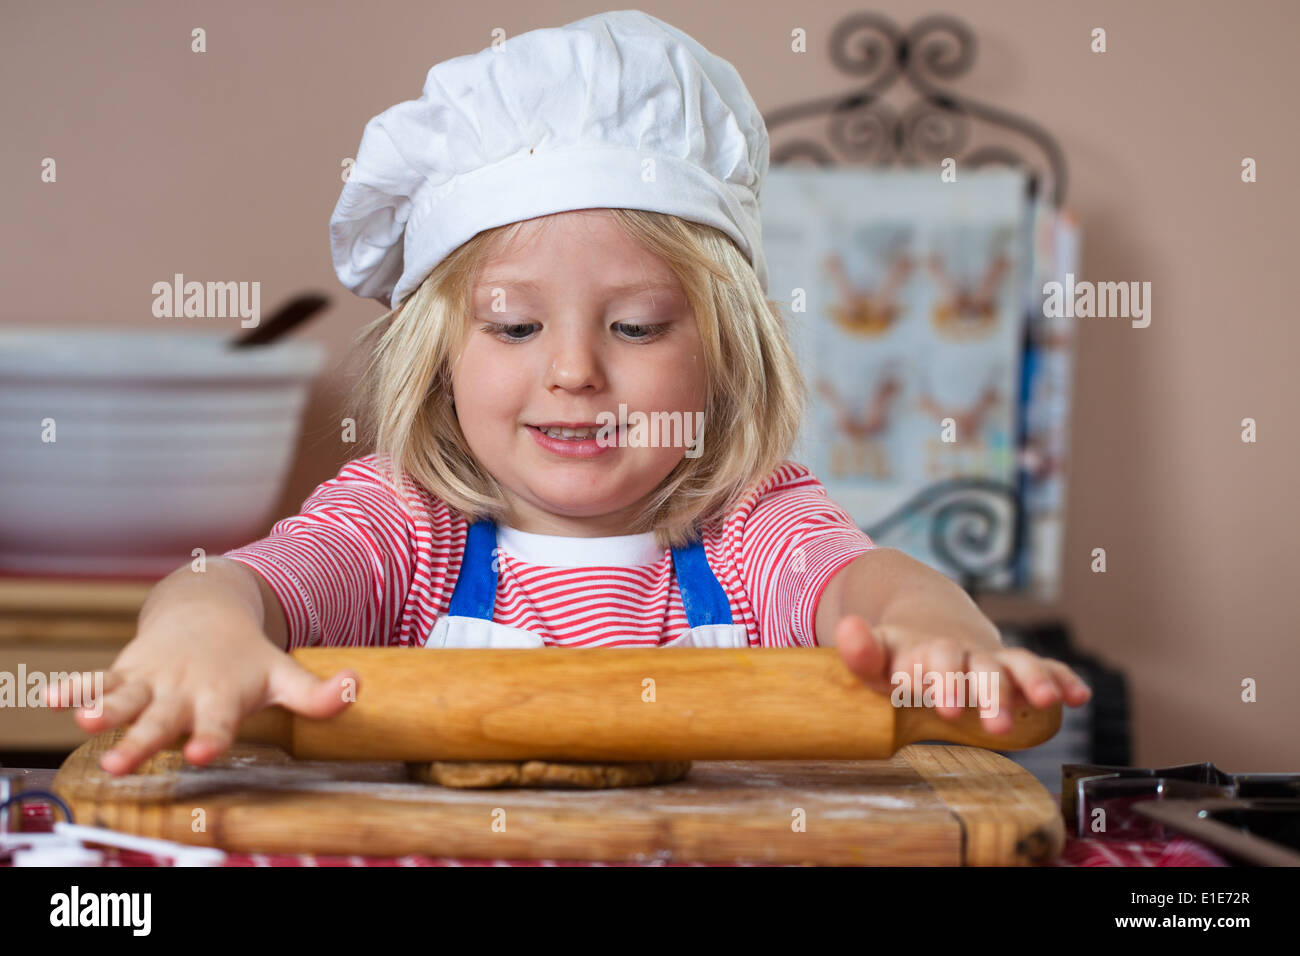 A cute young boy is baking and rolling out a gingerbread dough Stock Photo